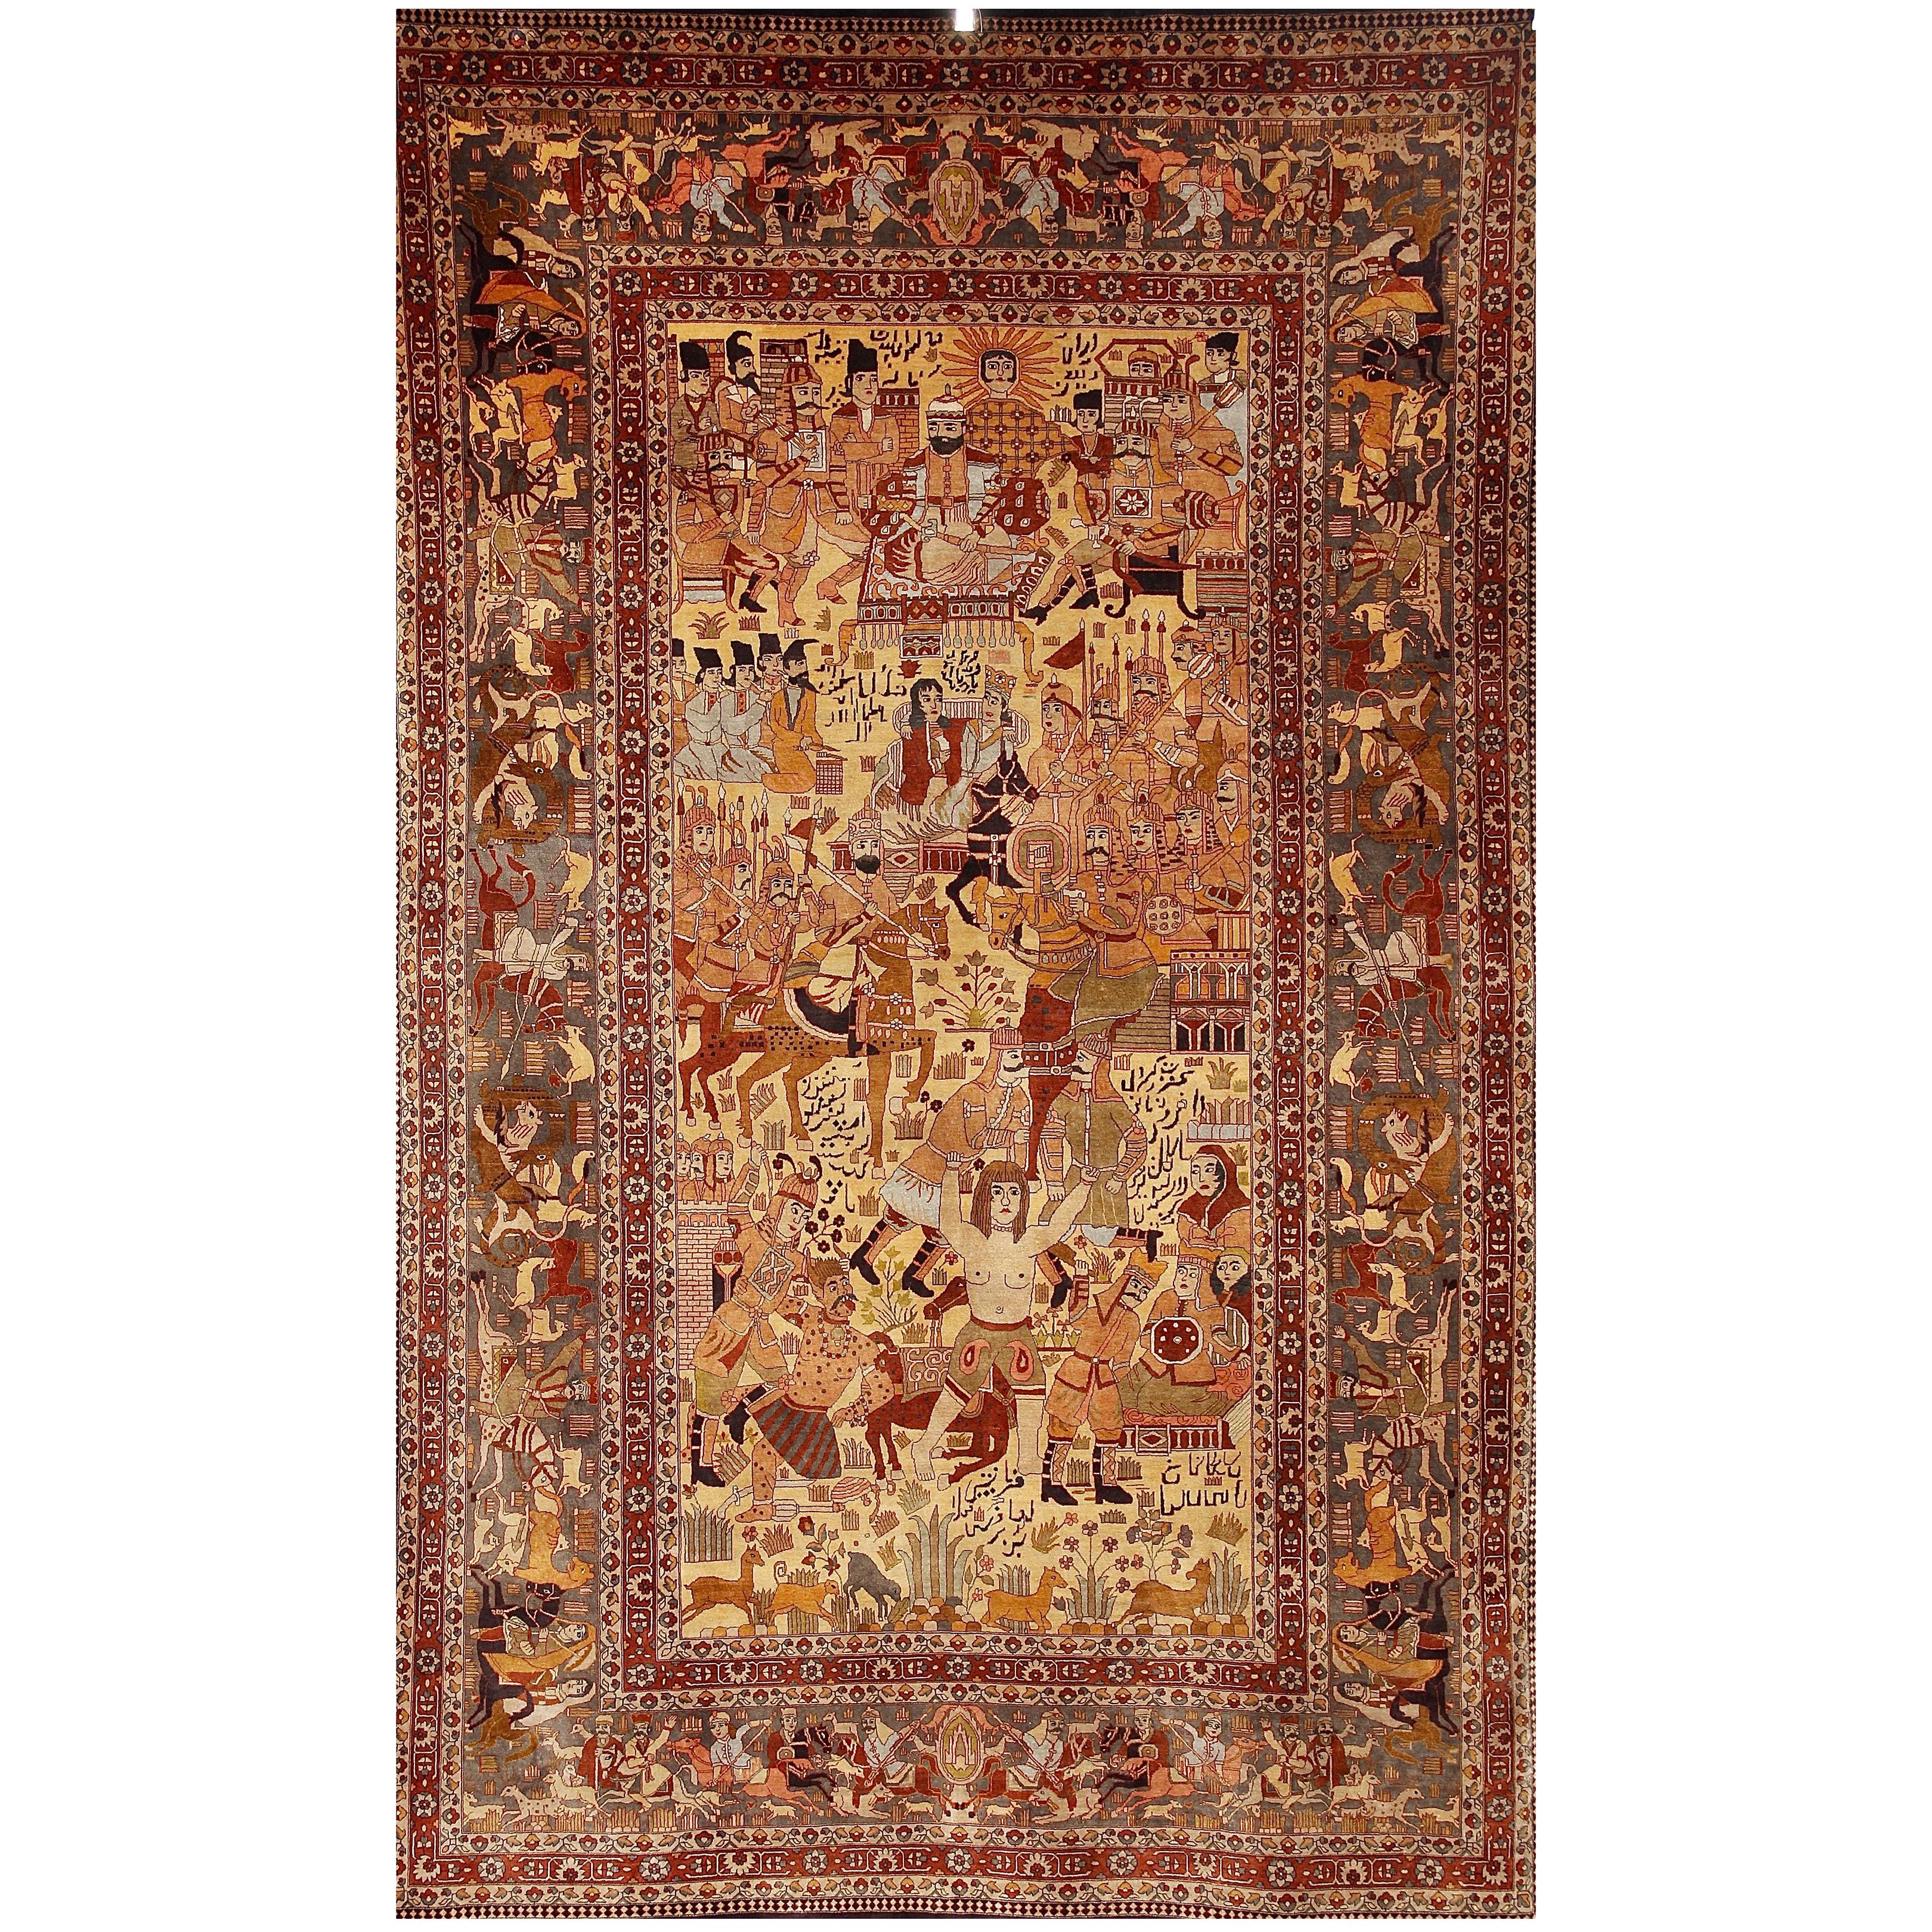 Pictorial Rug 'Tapestry' Carpet, Hand-Knotted, Bridal Couple, Generals, Poets